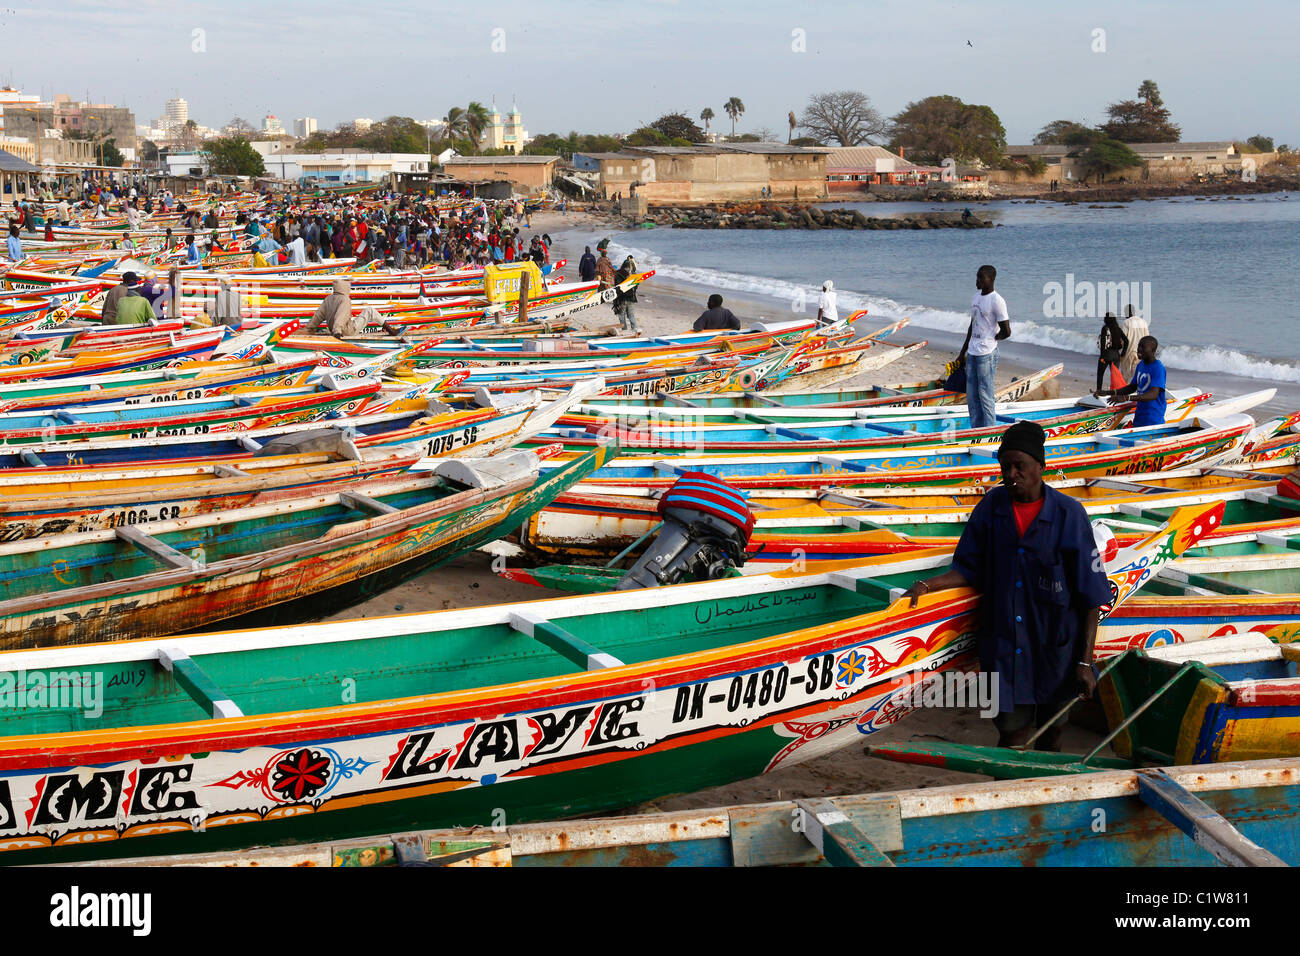 Colorfully painted fishing boats line the beach at the fish market in Dakar, Senegal Stock Photo